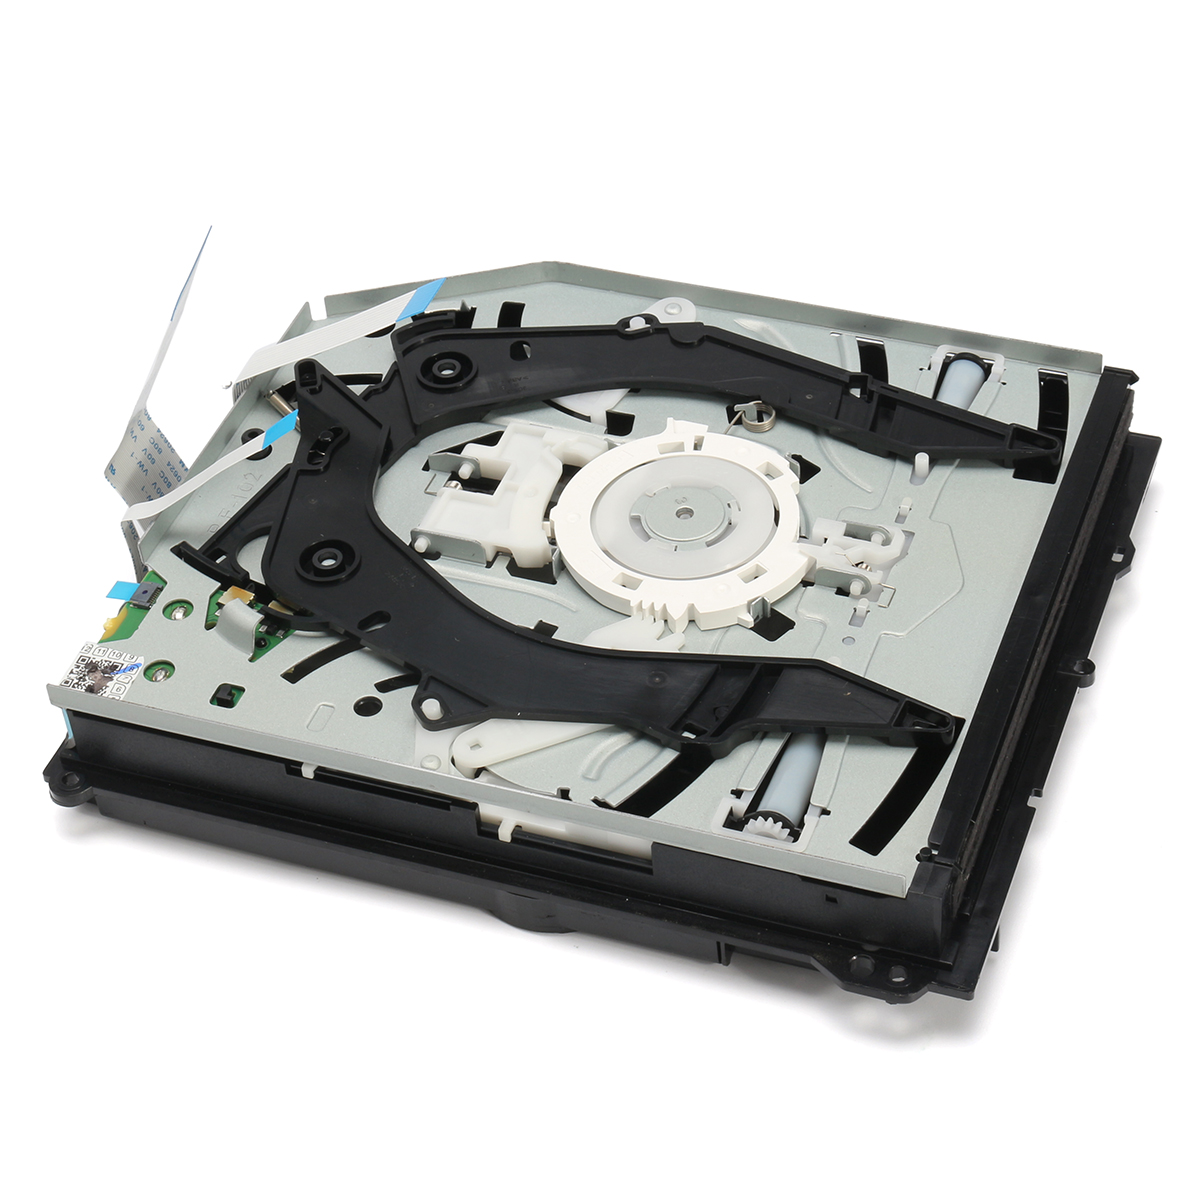 Blu-ray-Disk-CD-Drive-Replacement-Part-for-Sony-PS4-CUH-1215A-CUH-1215B-500GB-1TB-1332338-3